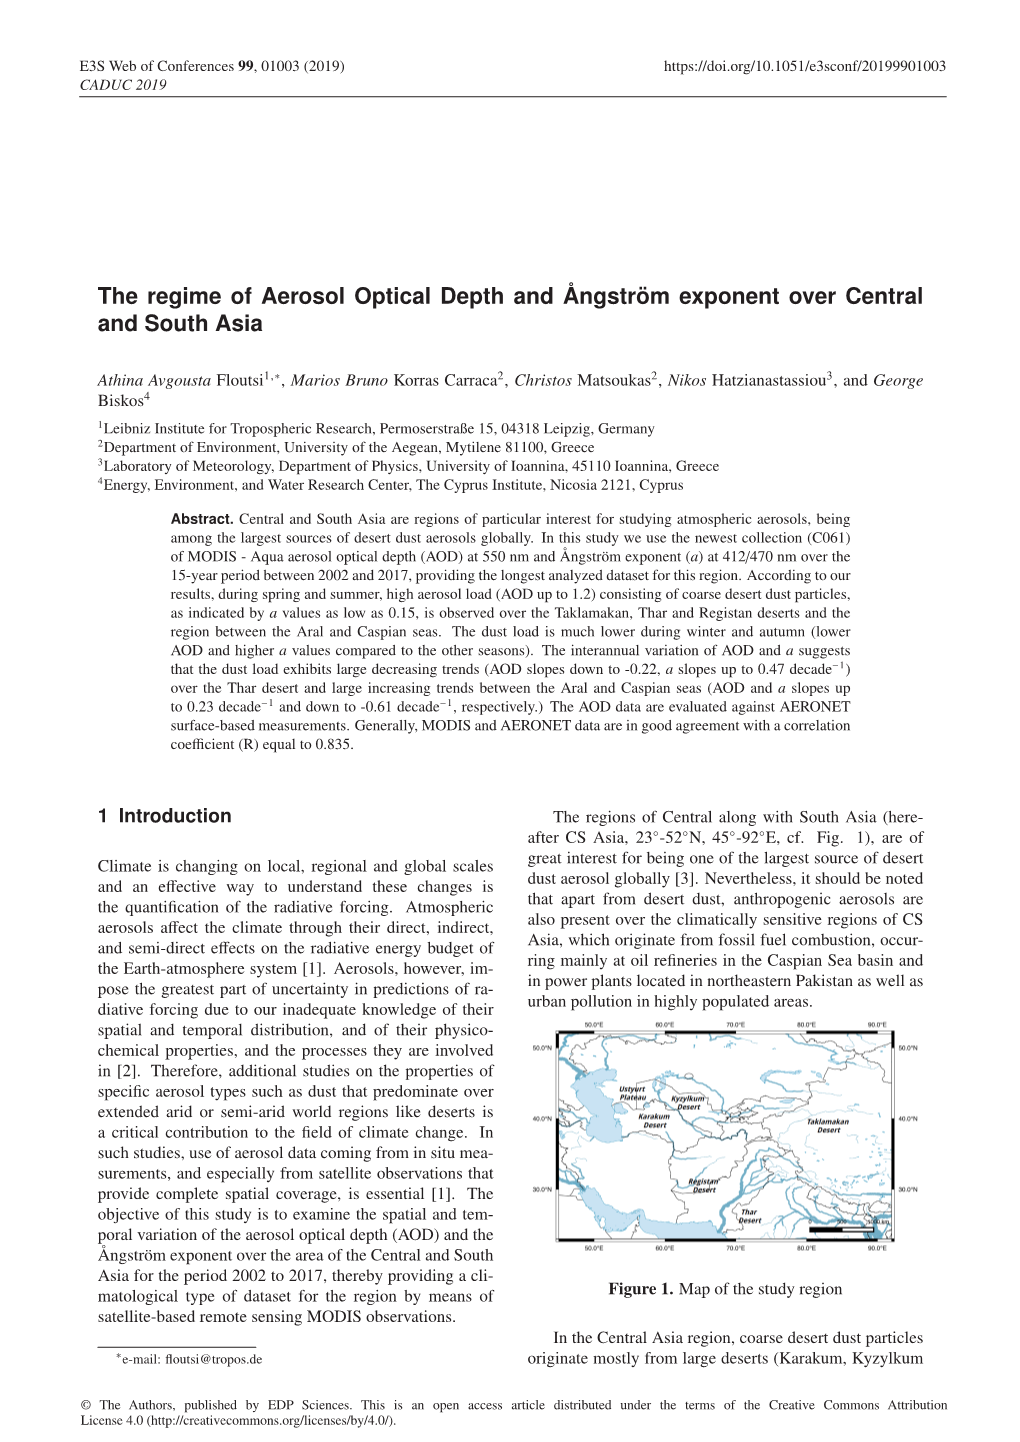 The Regime of Aerosol Optical Depth and Ångström Exponent Over Central and South Asia